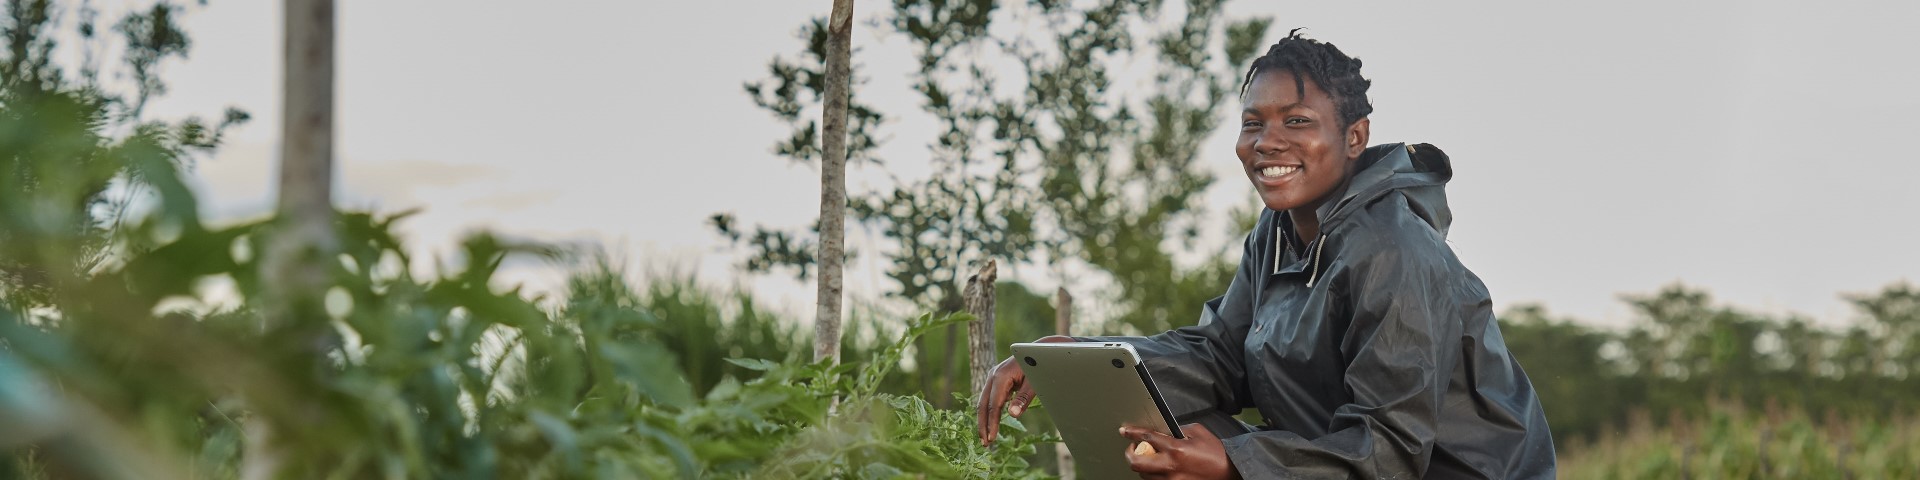 A person squats in a field holding a tablet.